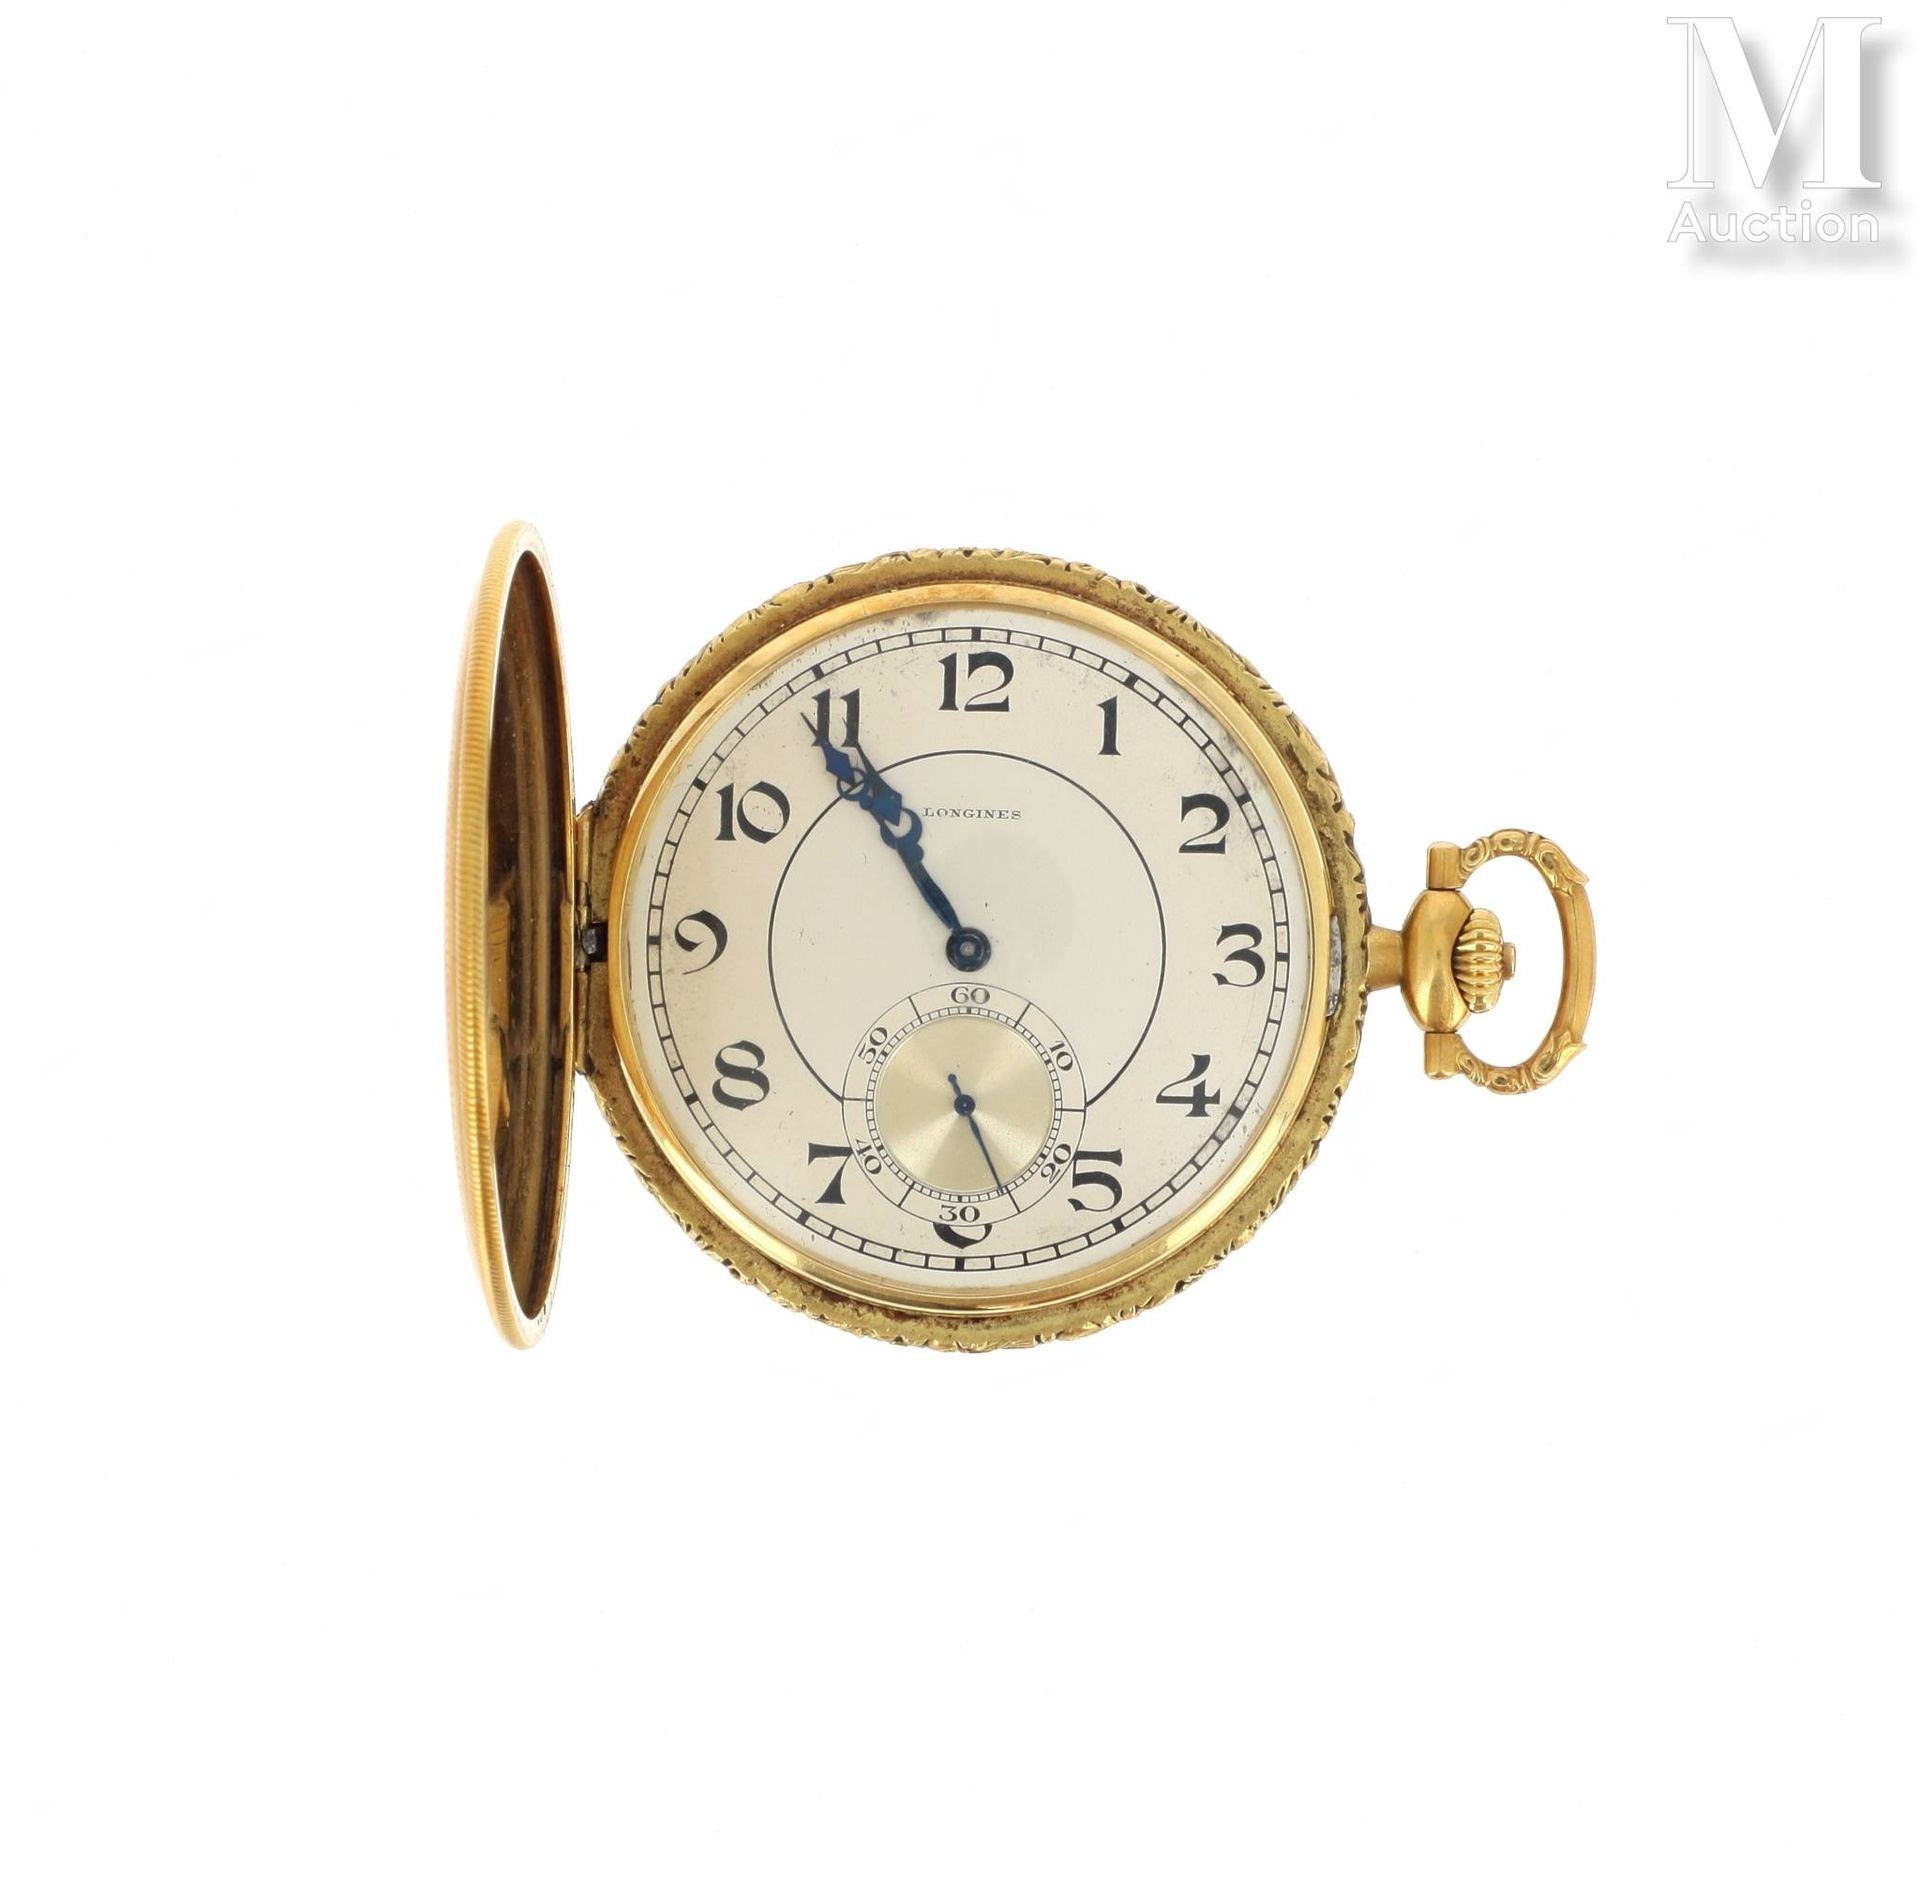 MONTRE DE POCHE LONGINES LONGINES

Pocket watch in 18K (750°/°°) yellow and whit&hellip;